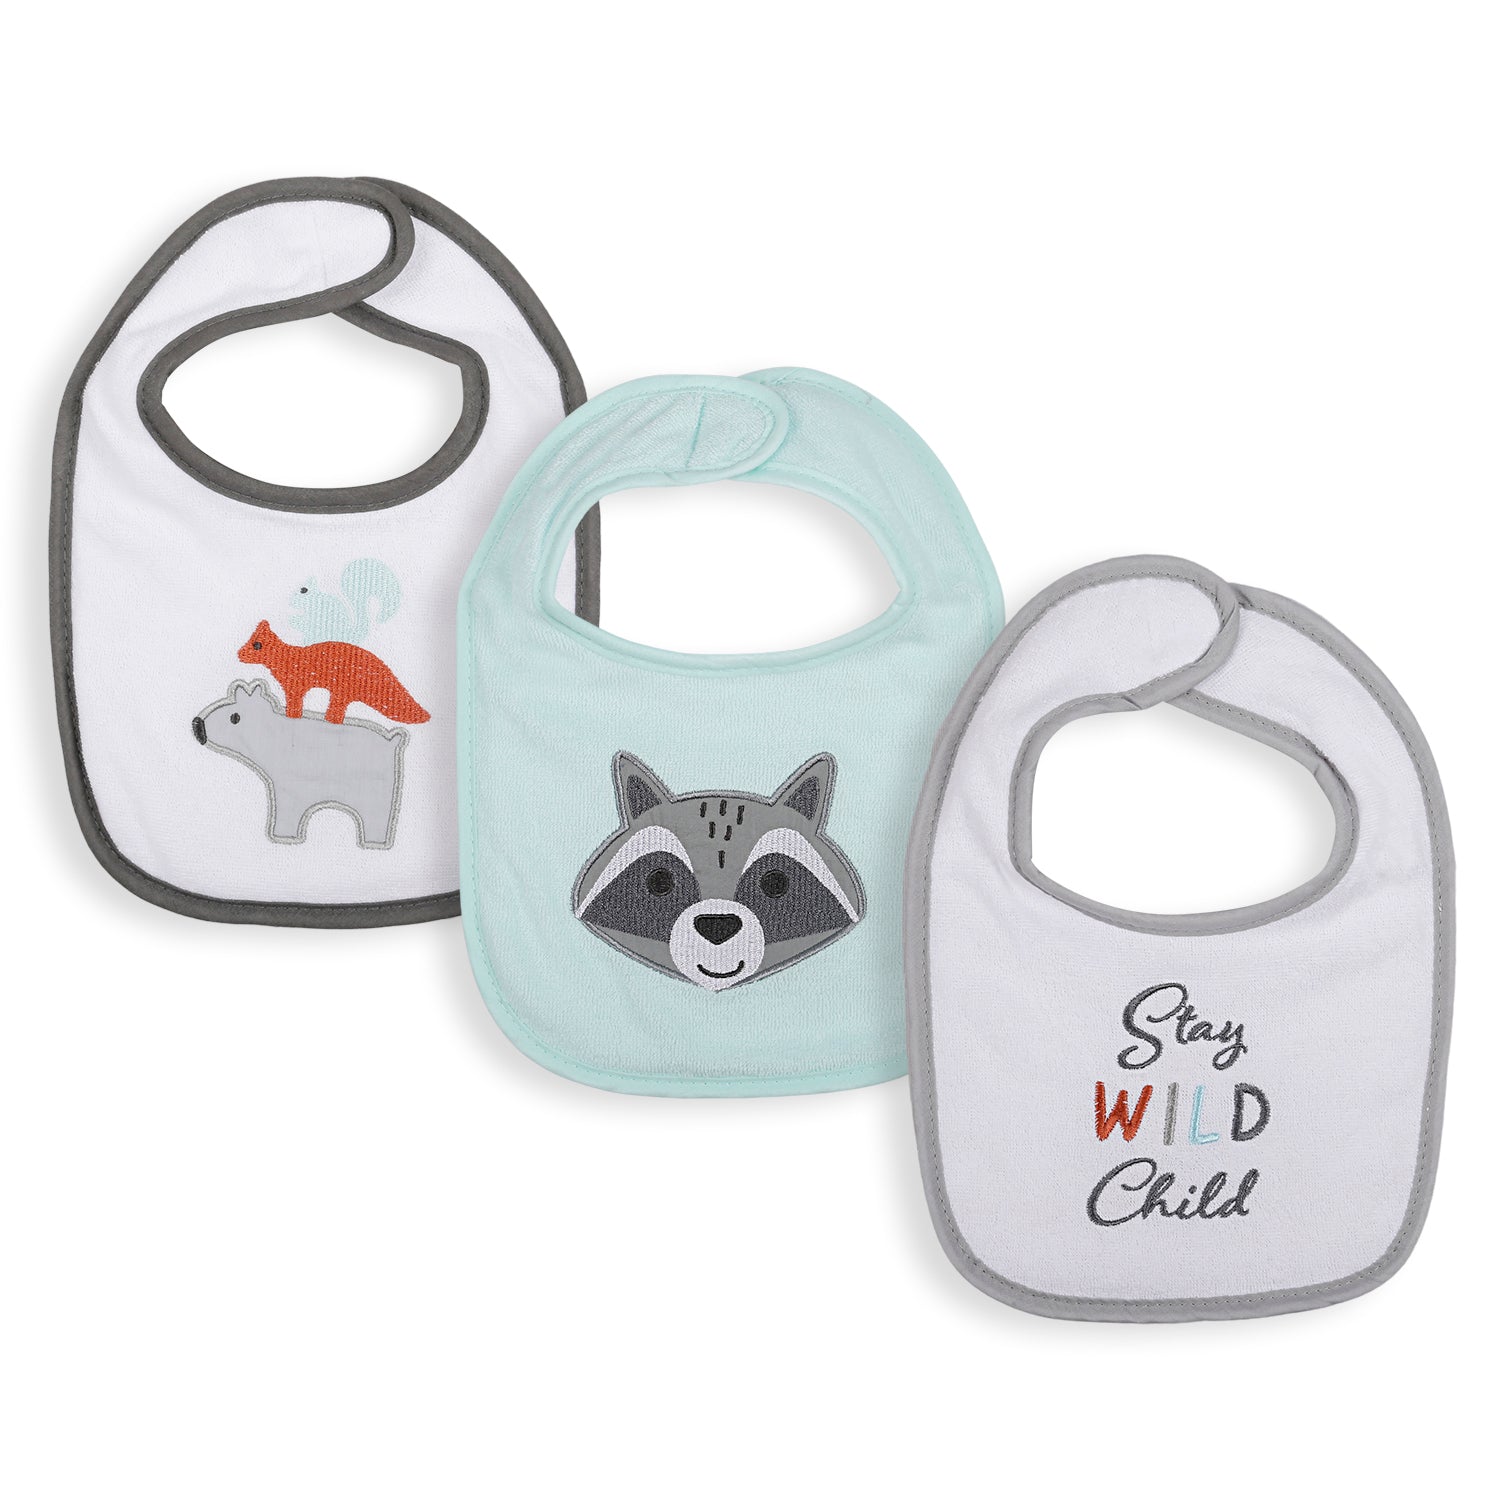 Feeding Bibs Pack Of 3 Wild Child White And Mint Green - Baby Moo